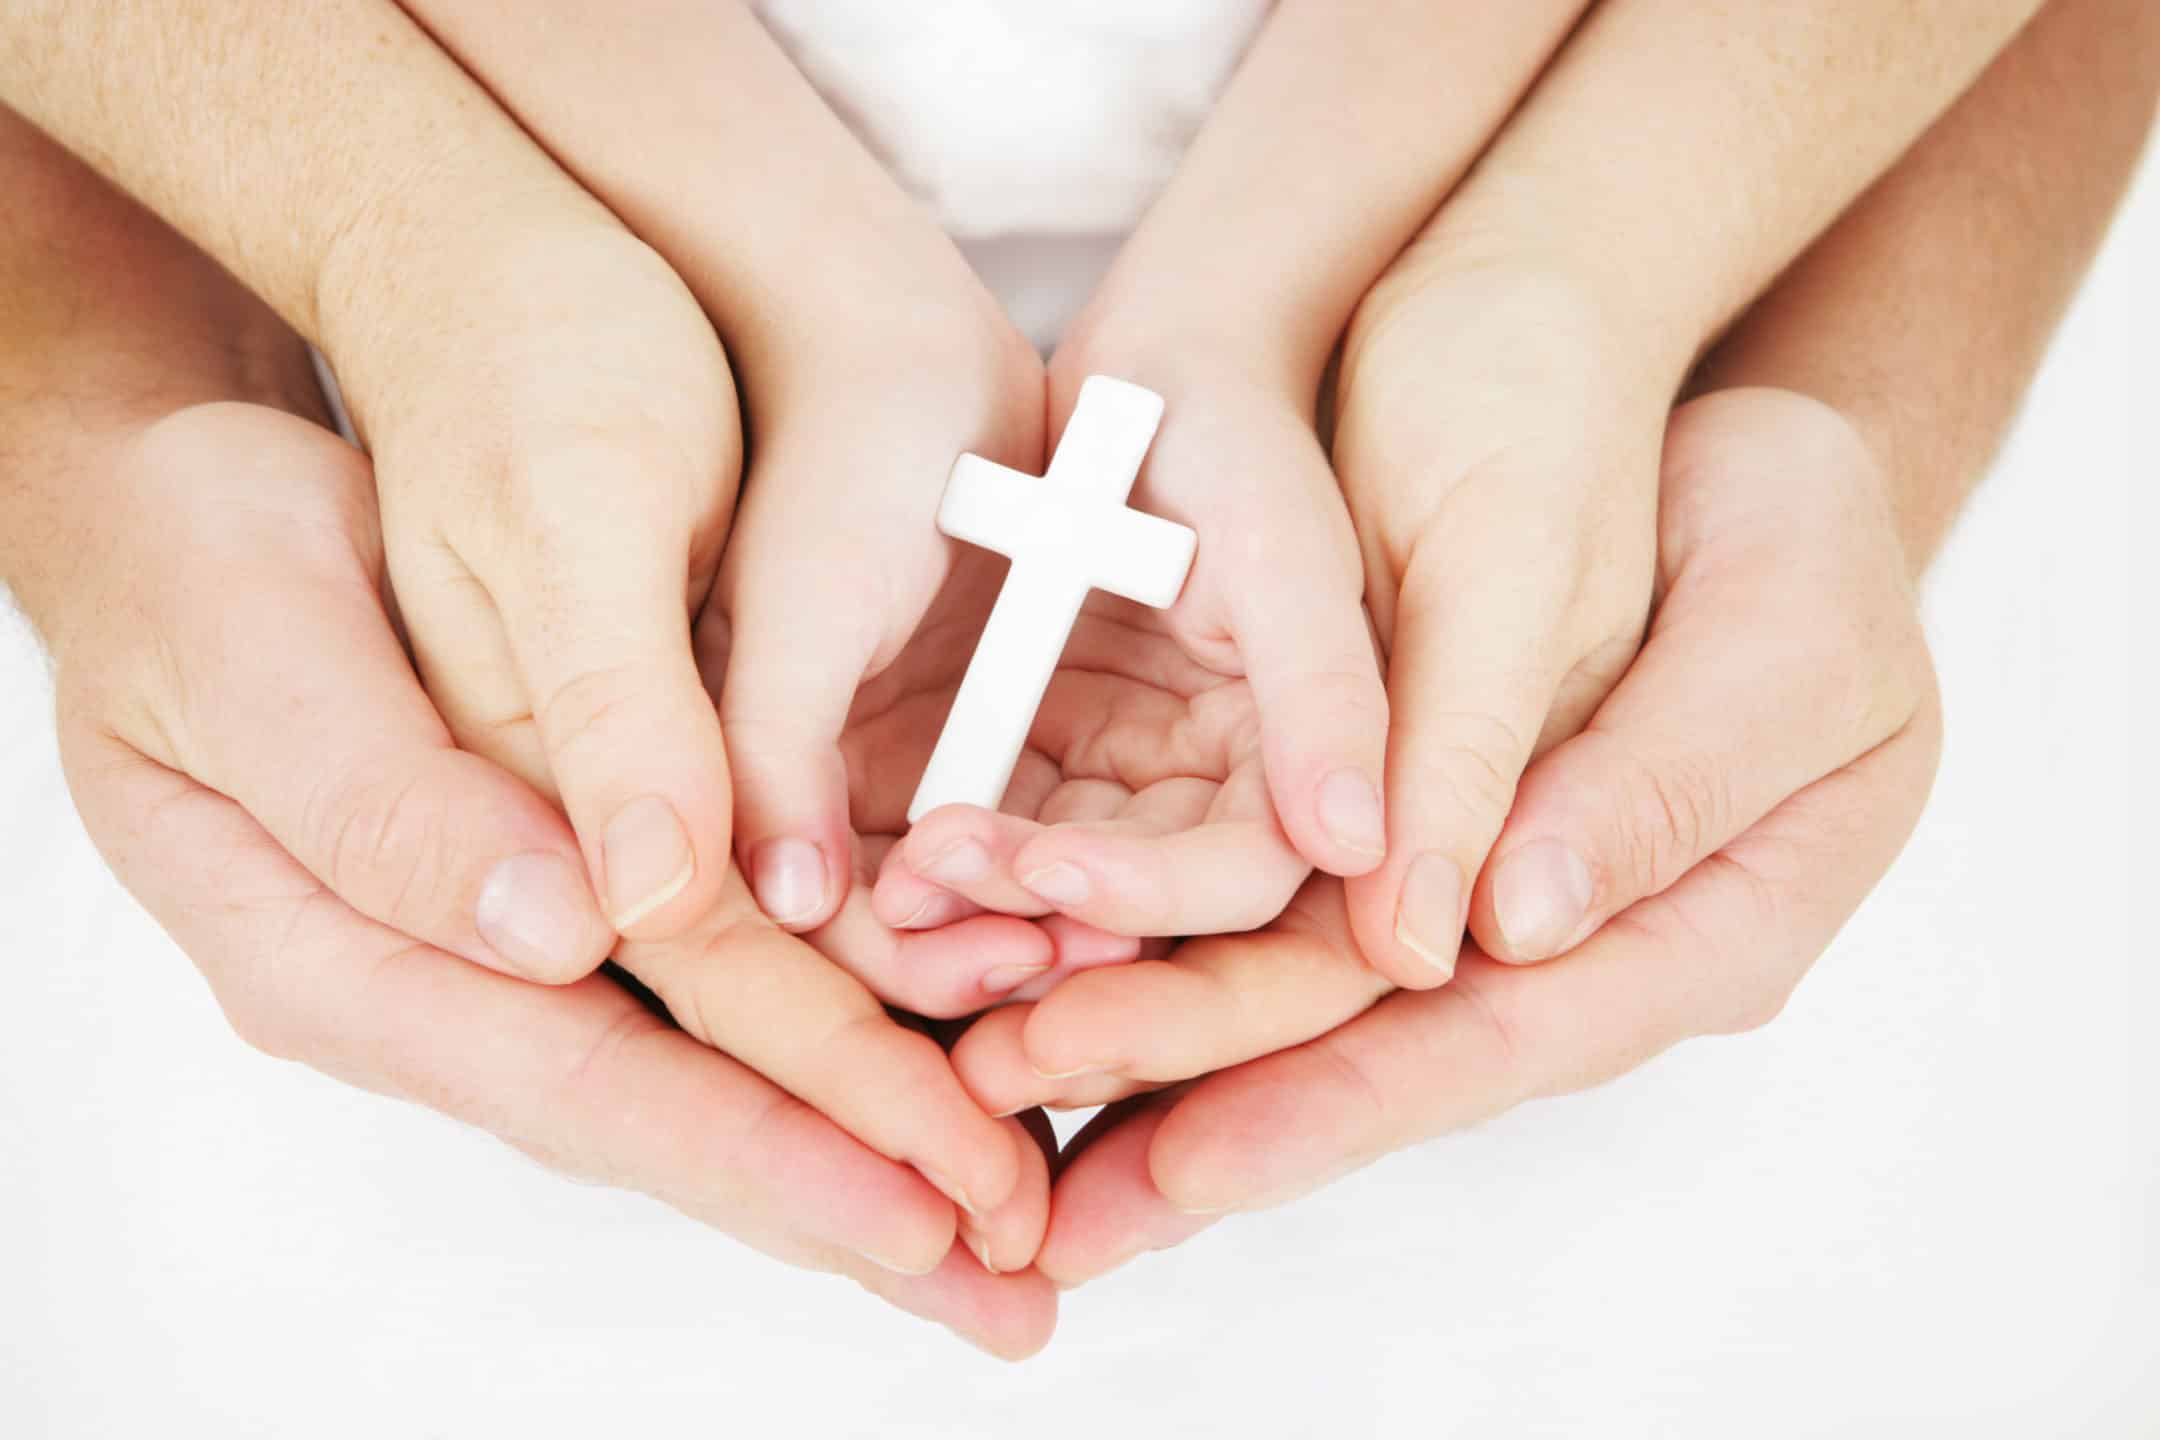 Family Hands holding a white cross